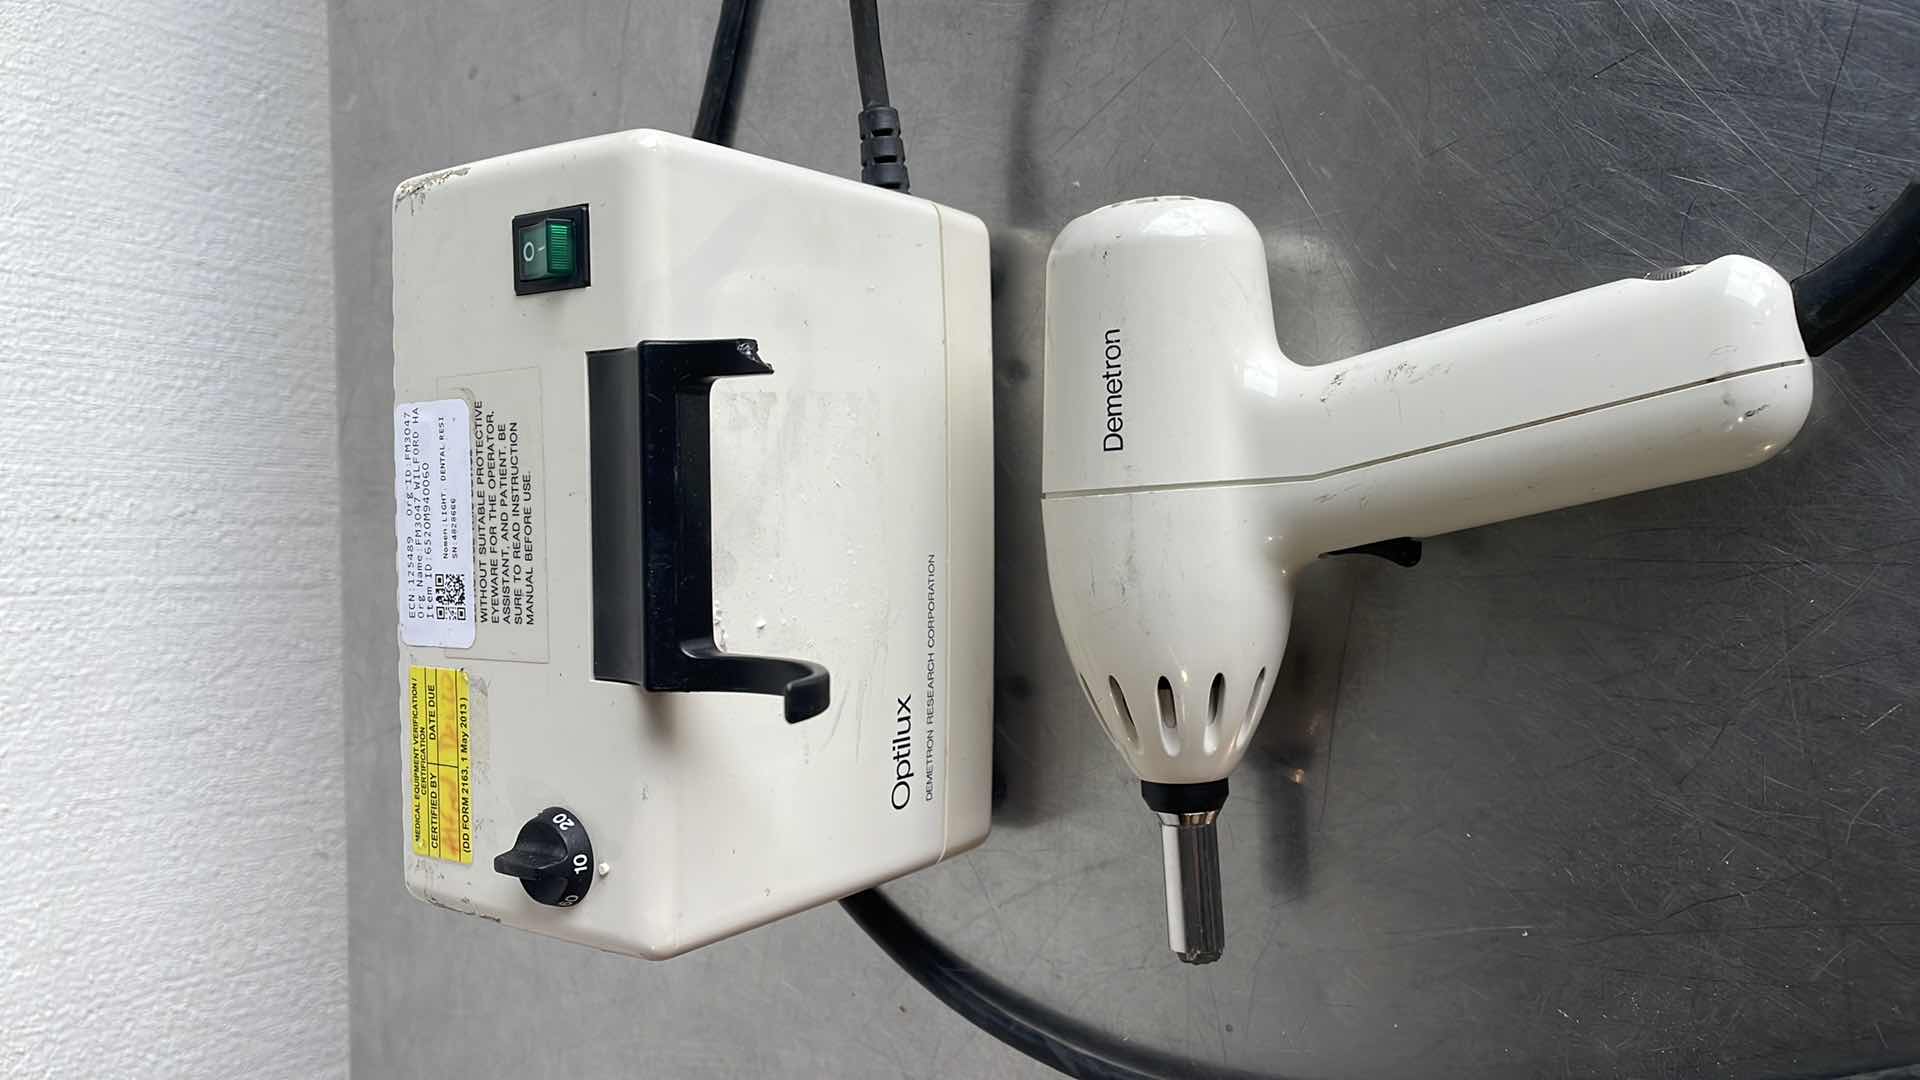 Photo 2 of OPTILUX/DEMETRON VCL 401 DENTAL CURING LIGHT MISSING POWER CORD BROKEN BRACKET AS PICTURED UNABLE TO TEST NO POWER CORD